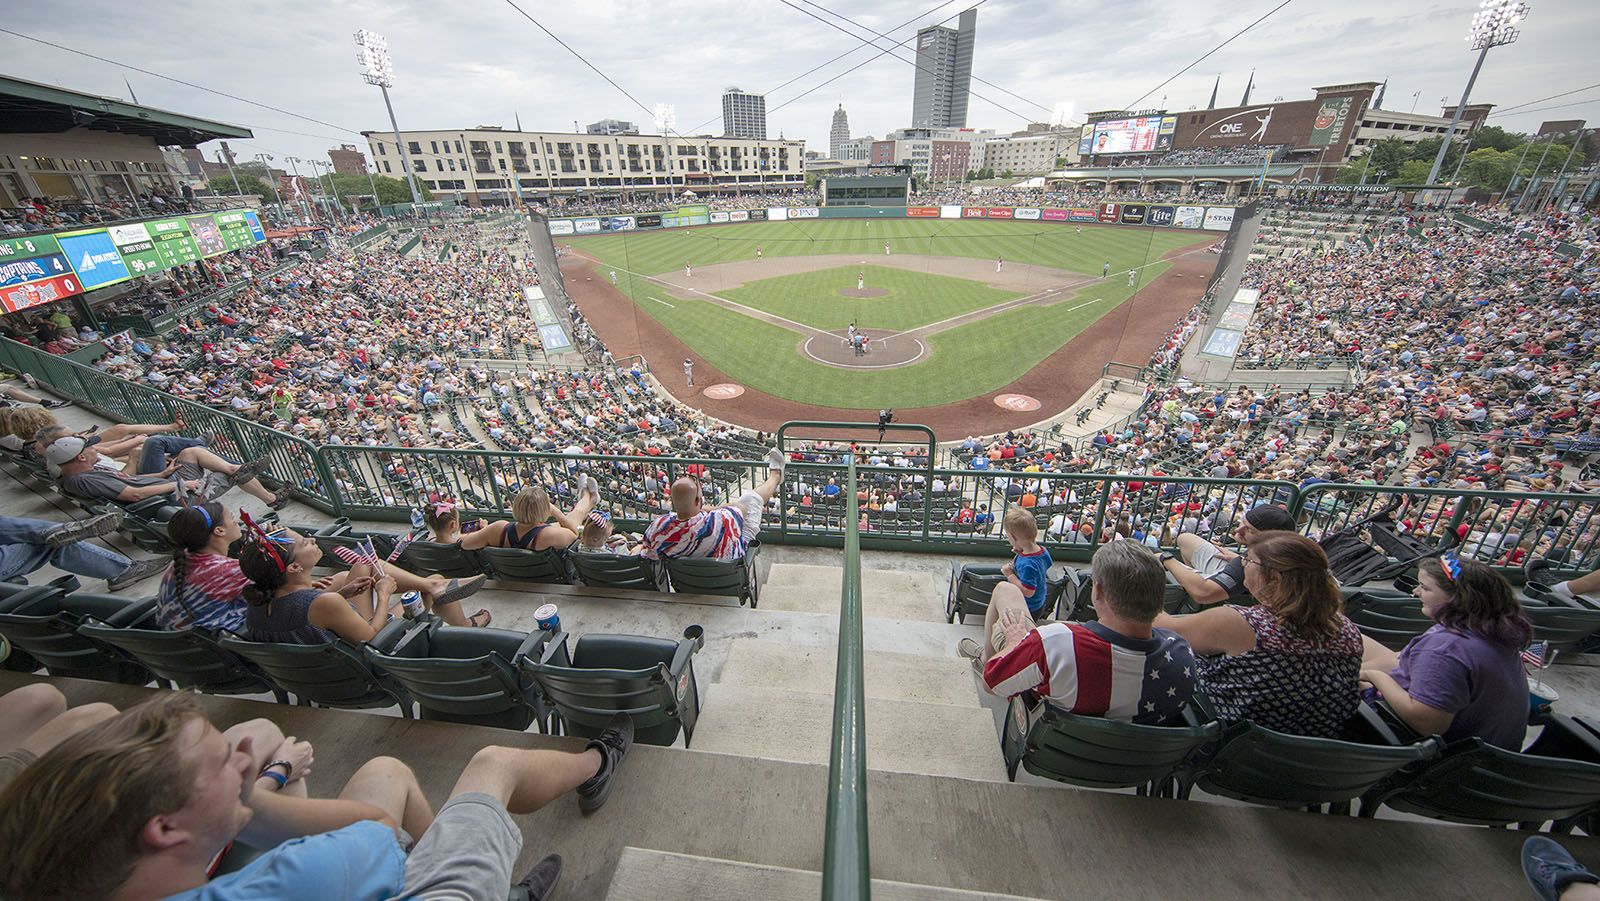 Parkview Field will come alive when the TinCaps open their home season on April 11,